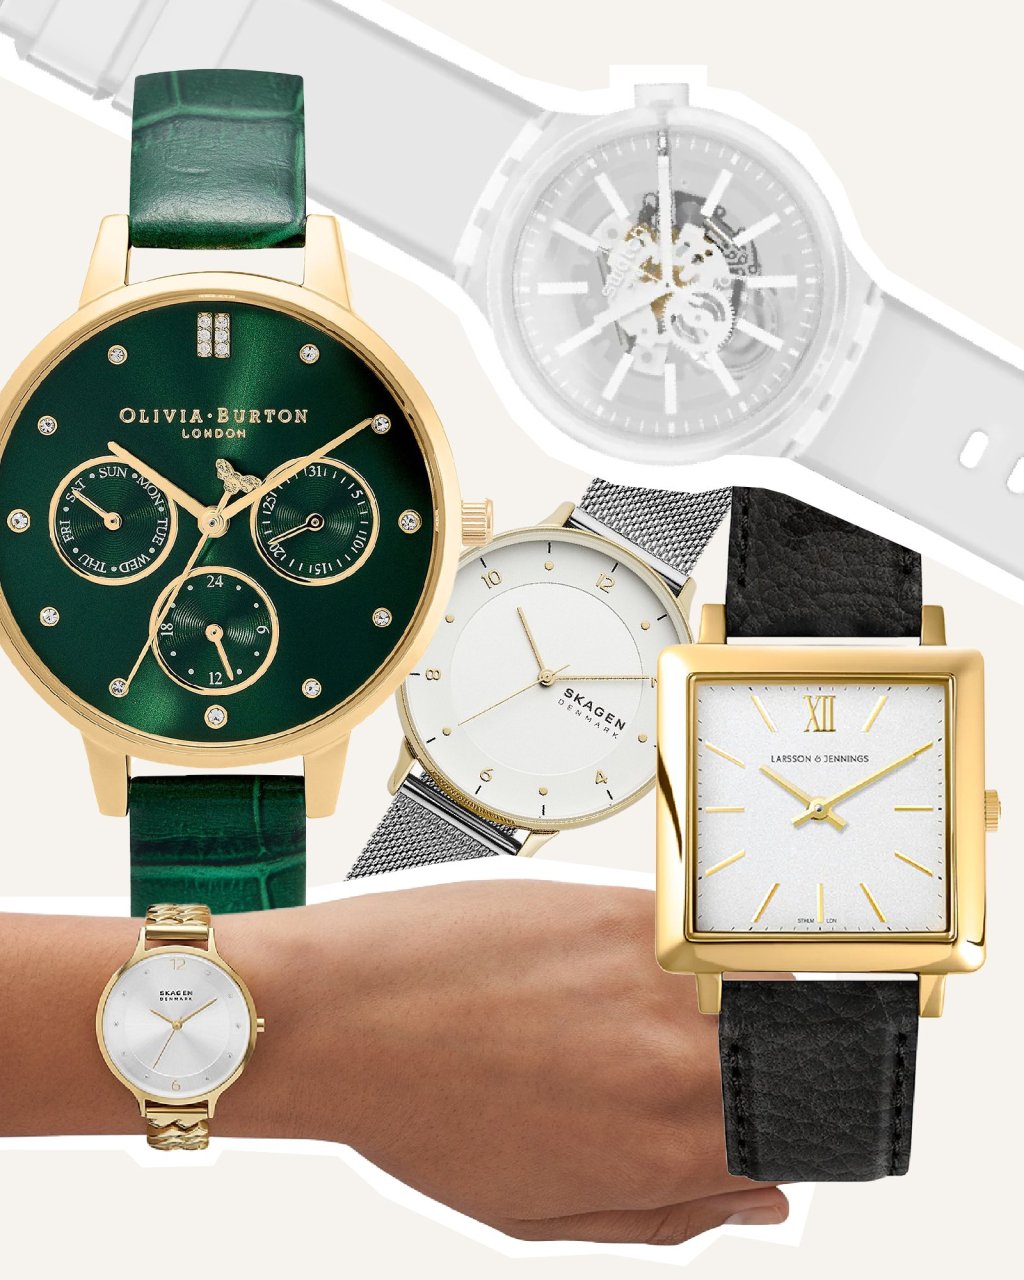 cool watches for women